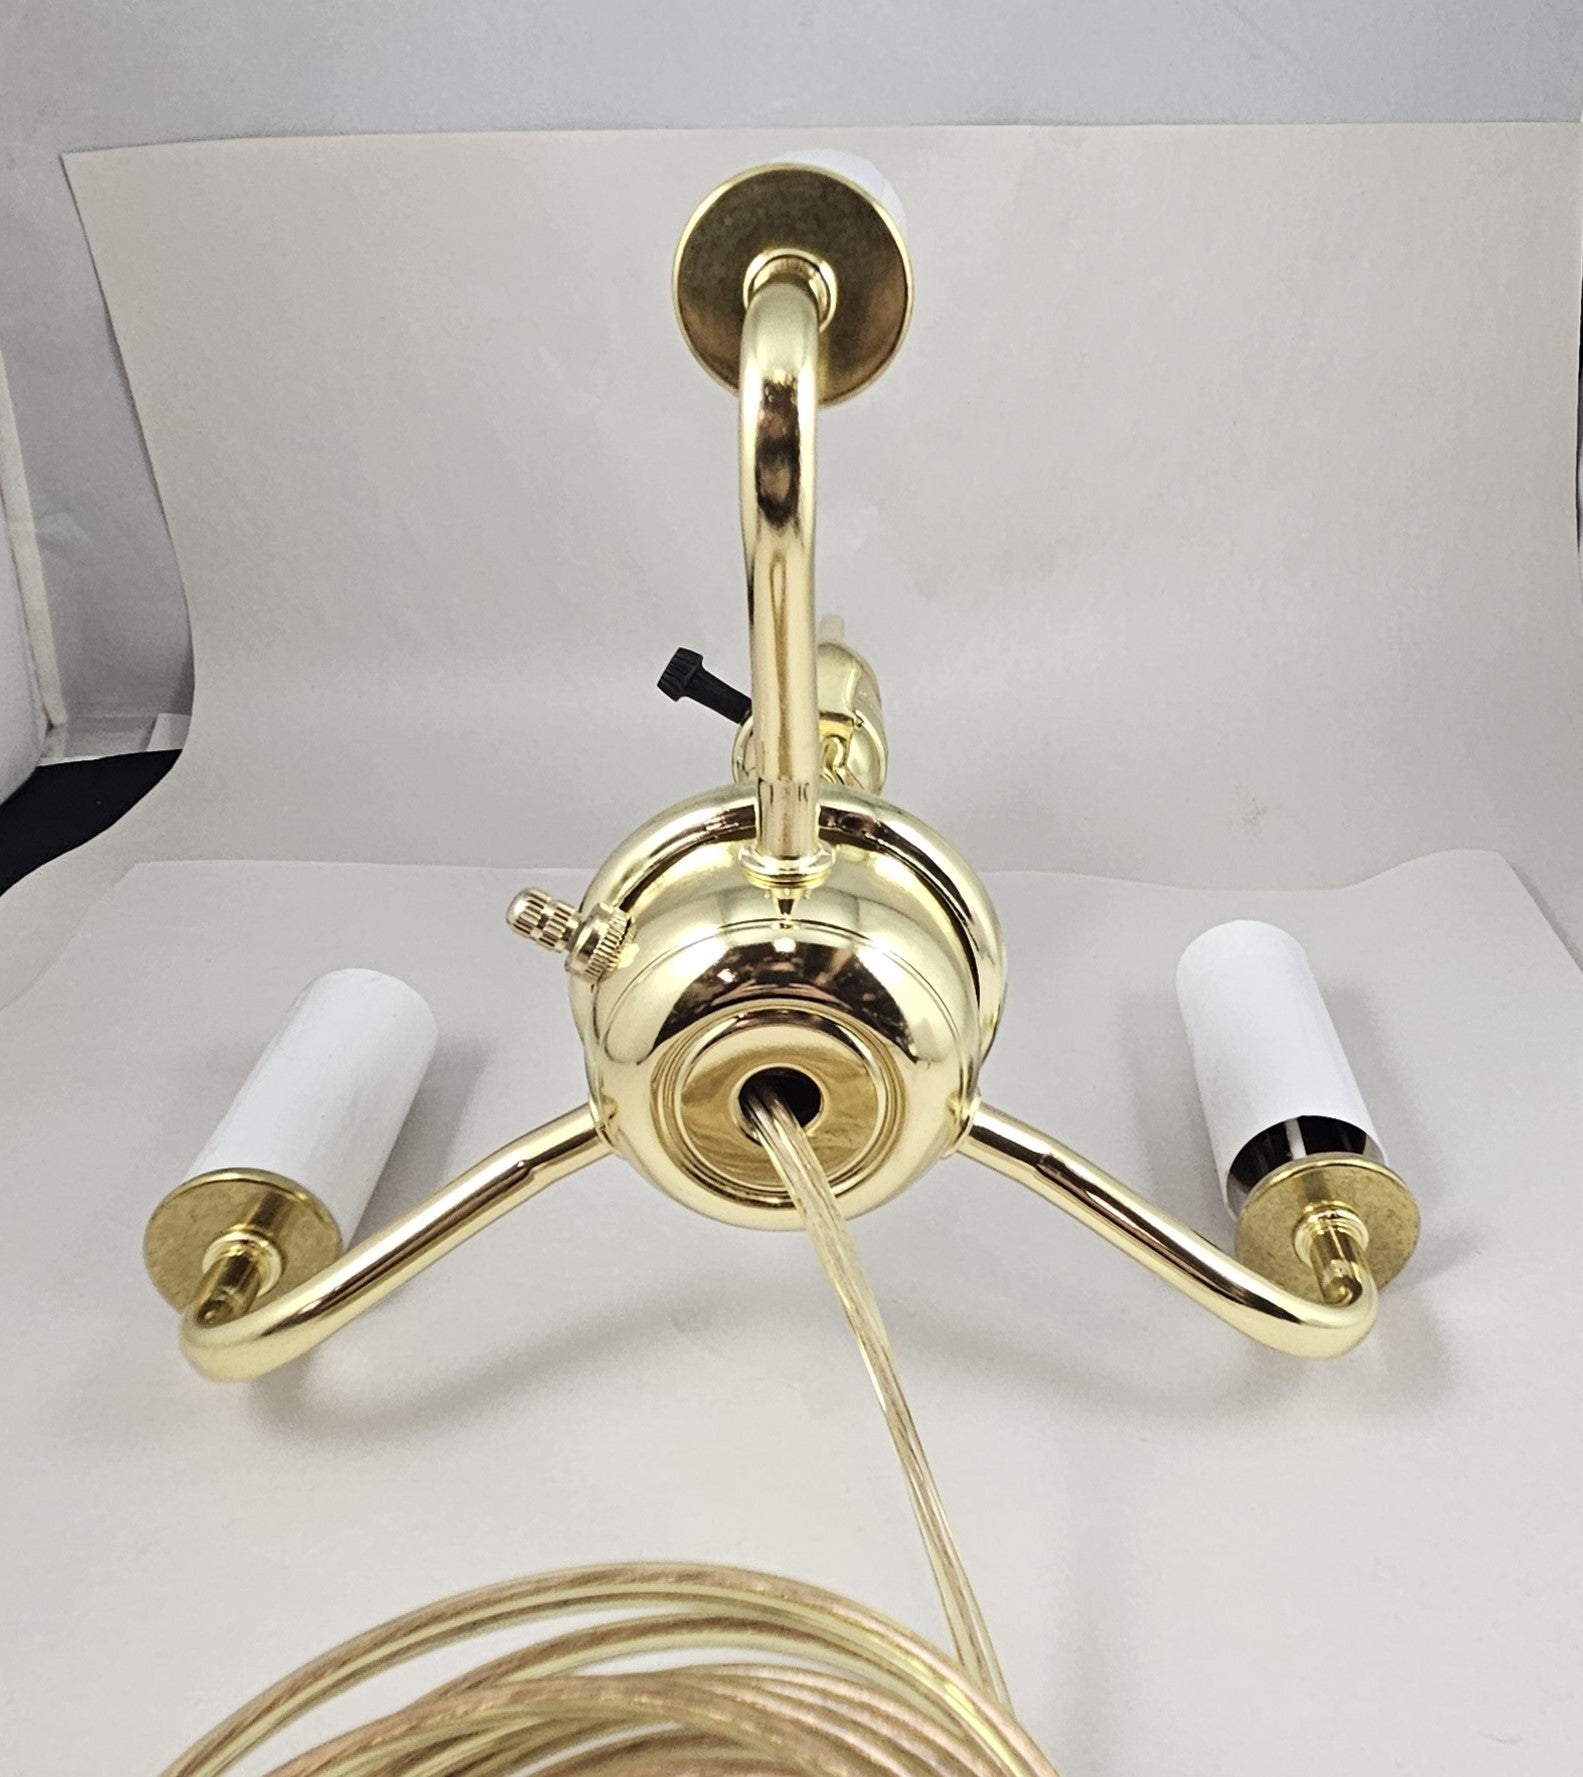 Floor Lamp Converter- Wired 3-way - Bottom tapped 1/4 IP